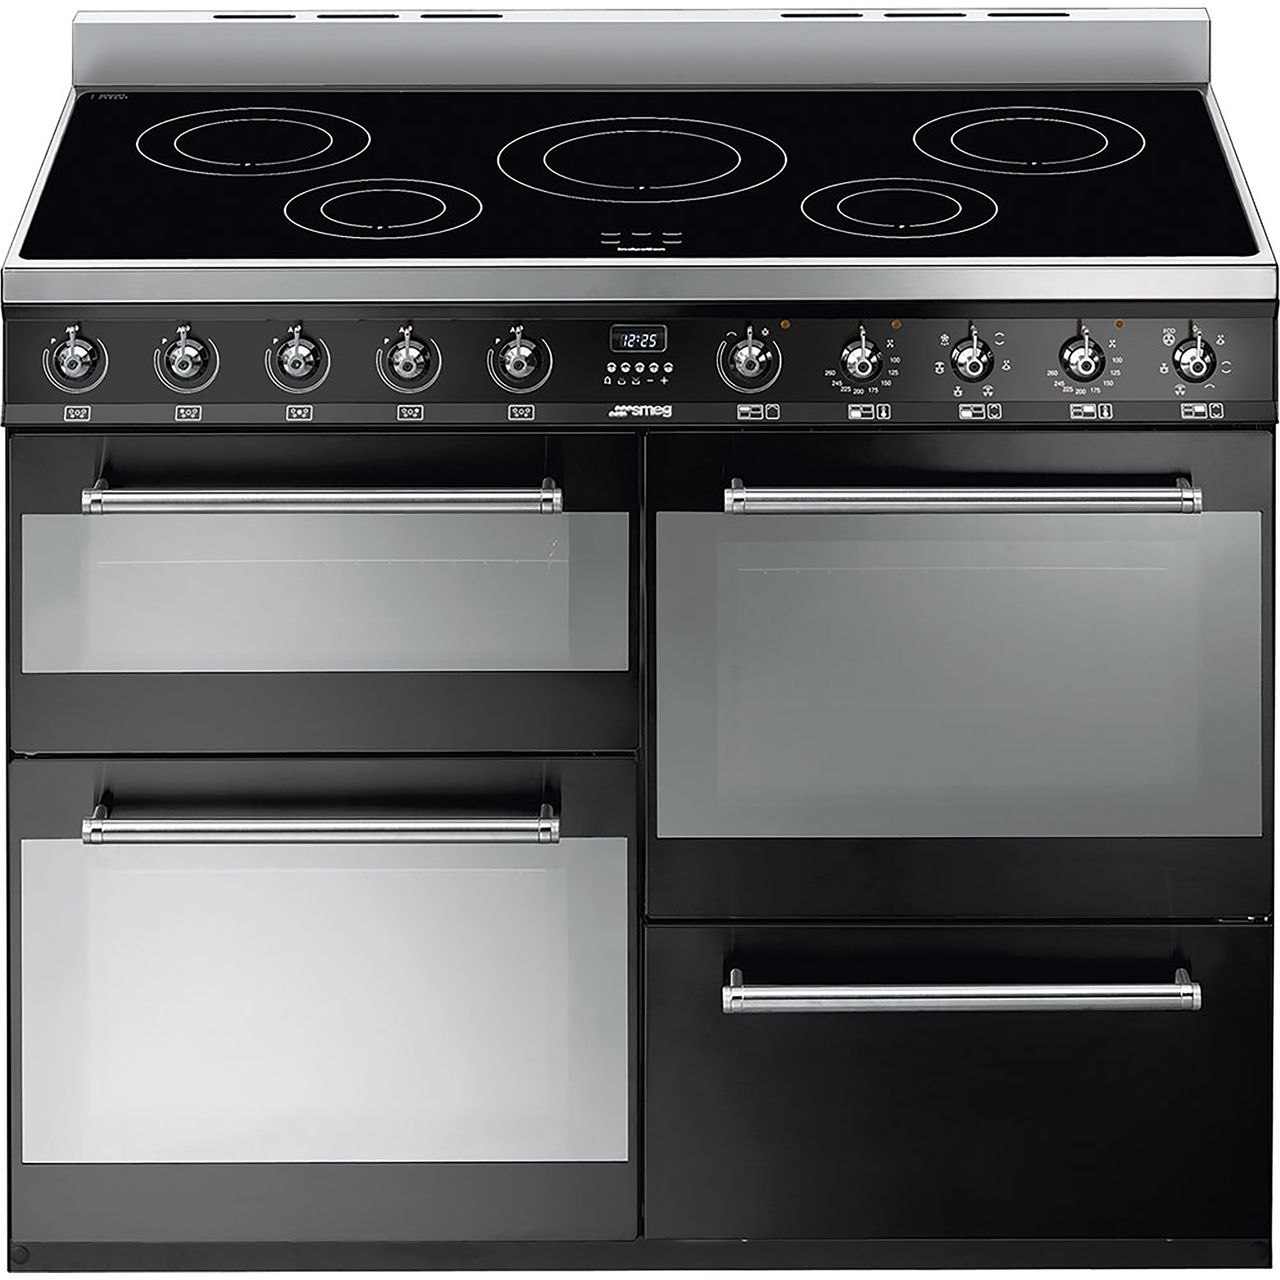 Smeg Symphony SYD4110iBL 110cm Electric Range Cooker with Induction Hob Review